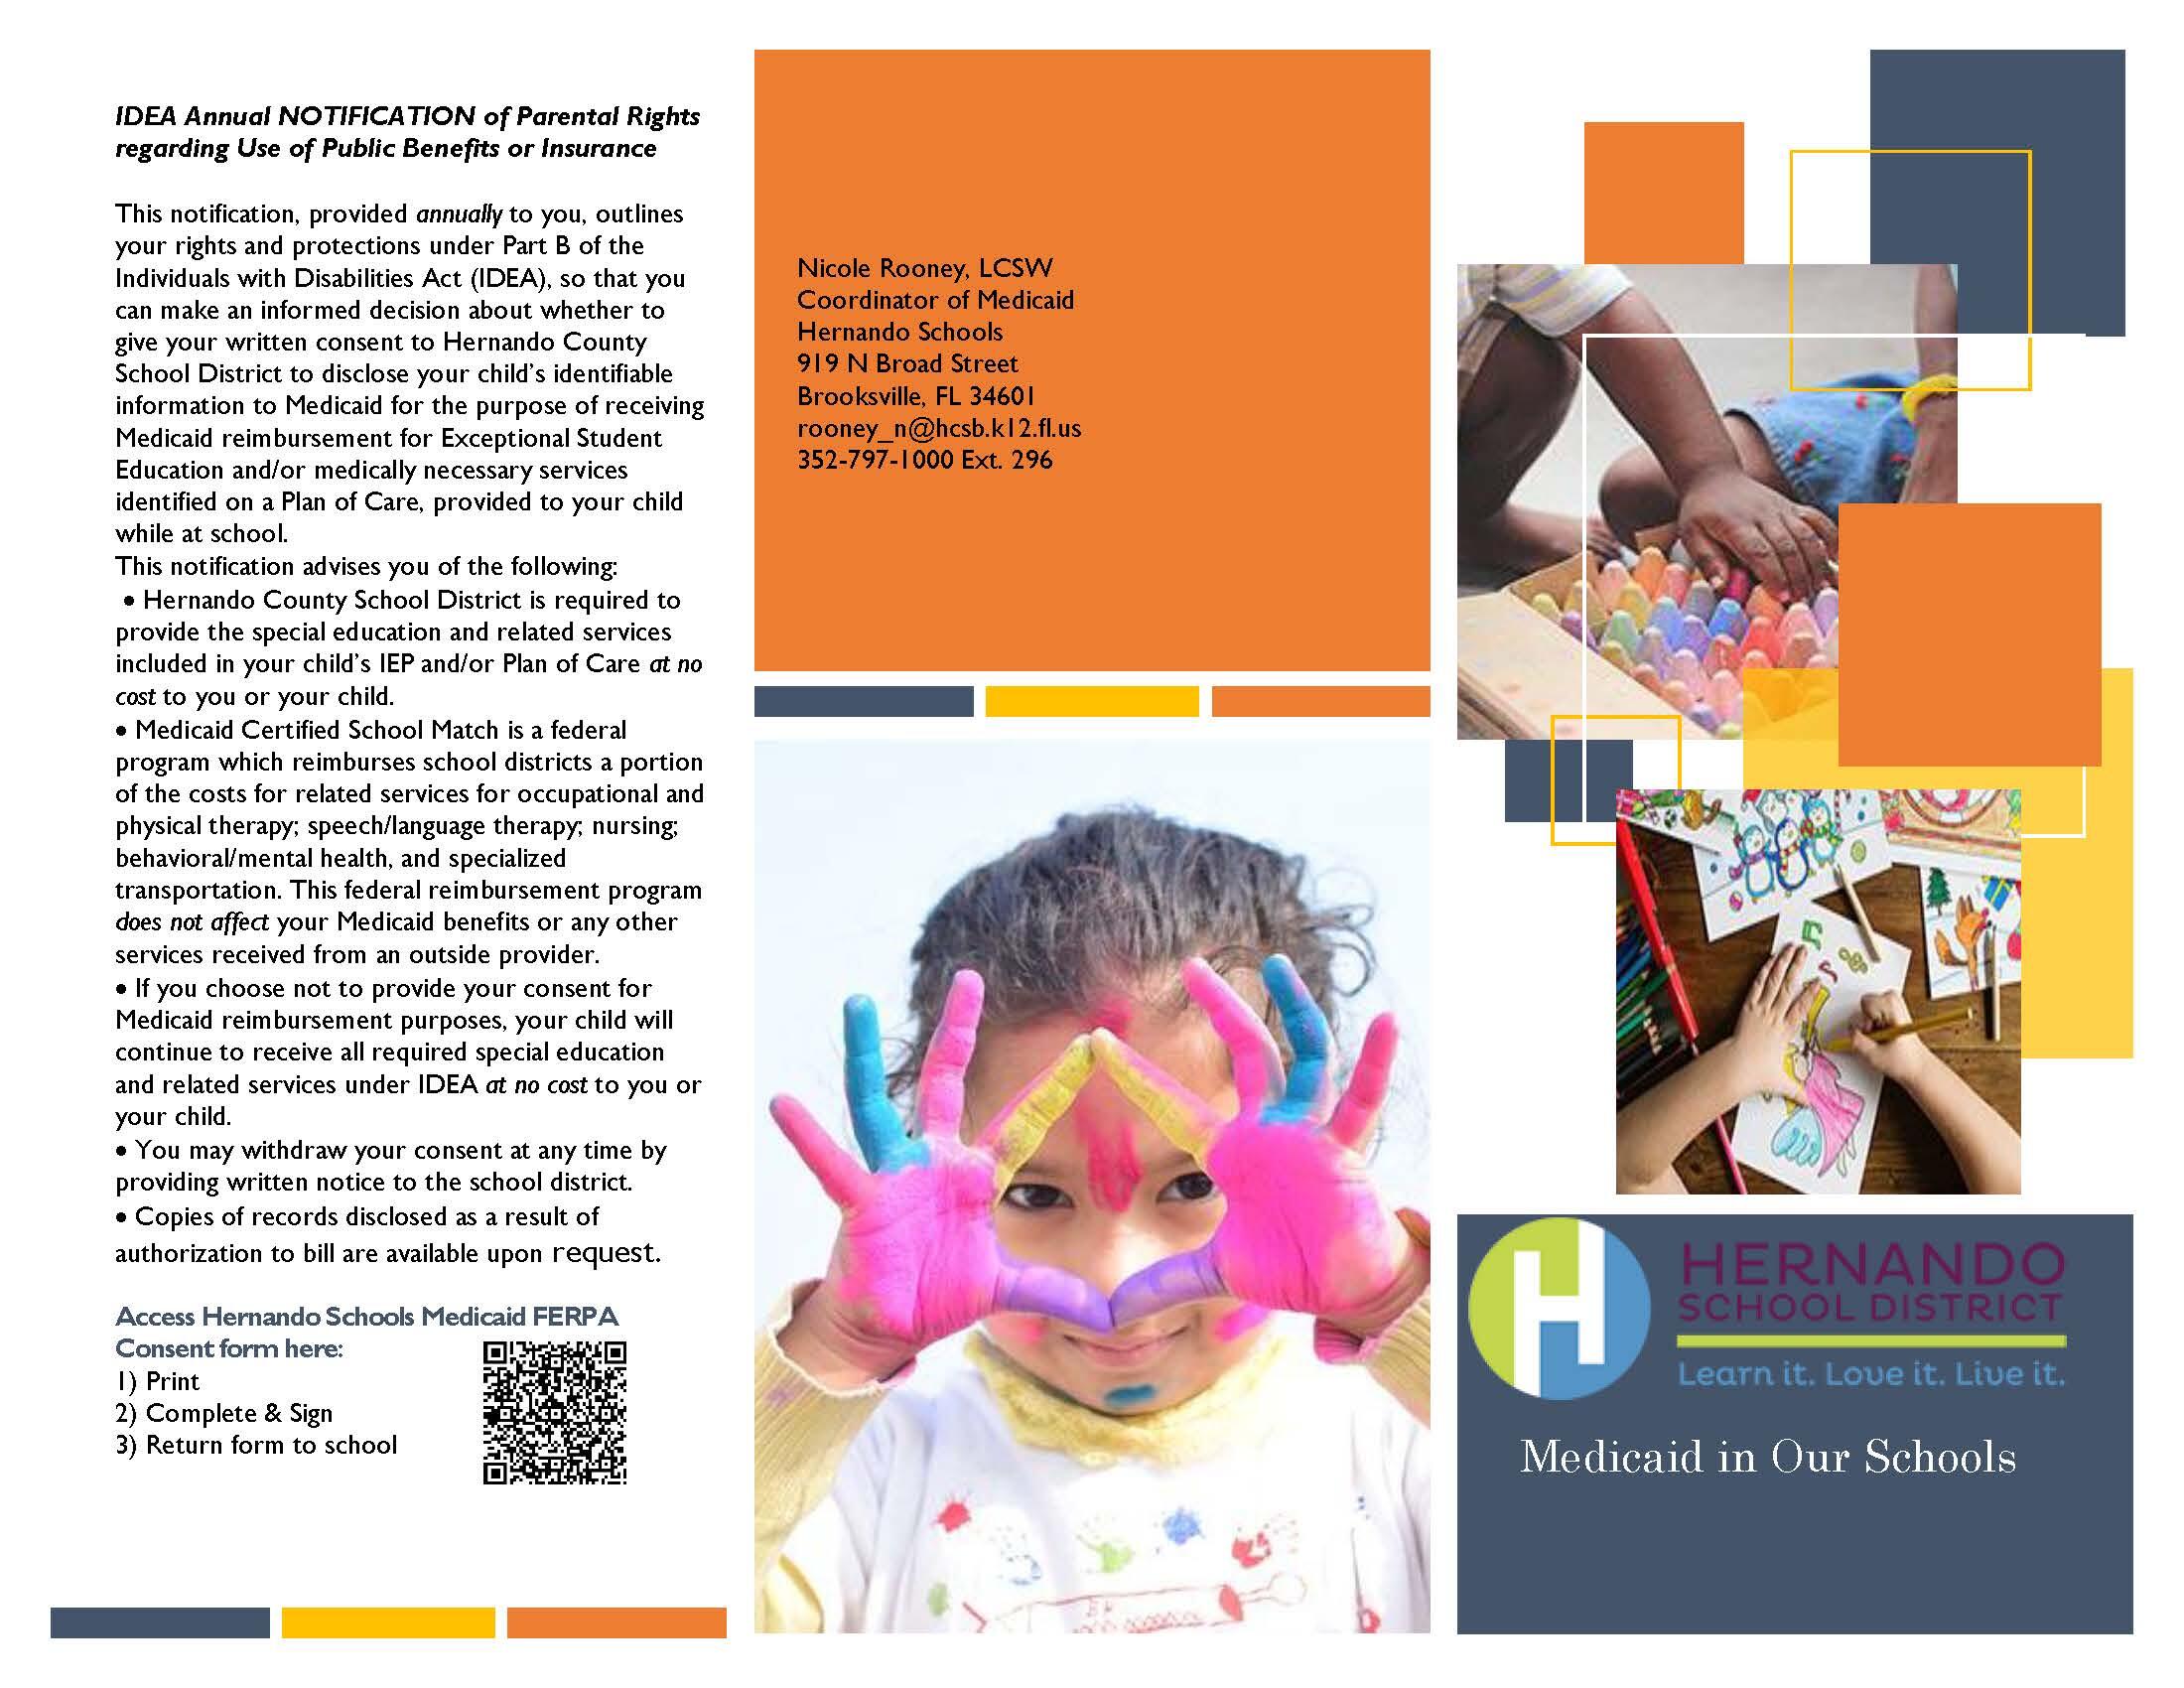 Medicaid in our schools brochure - Page 1